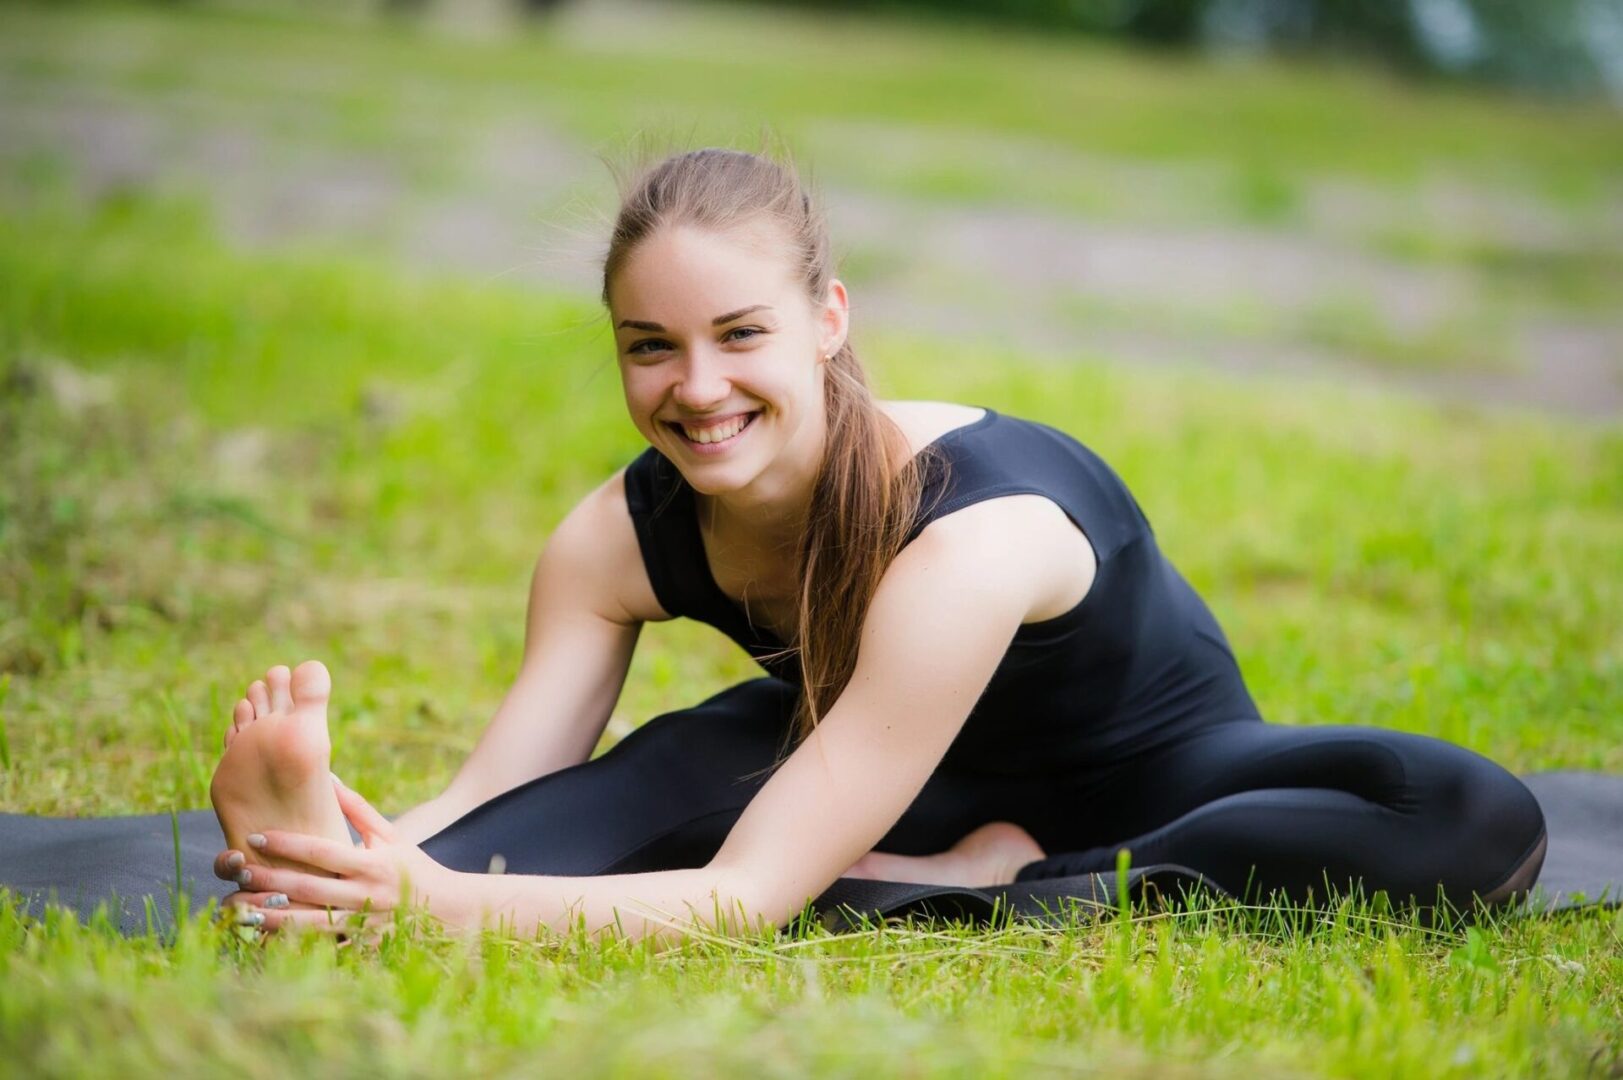 A woman is stretching in the grass